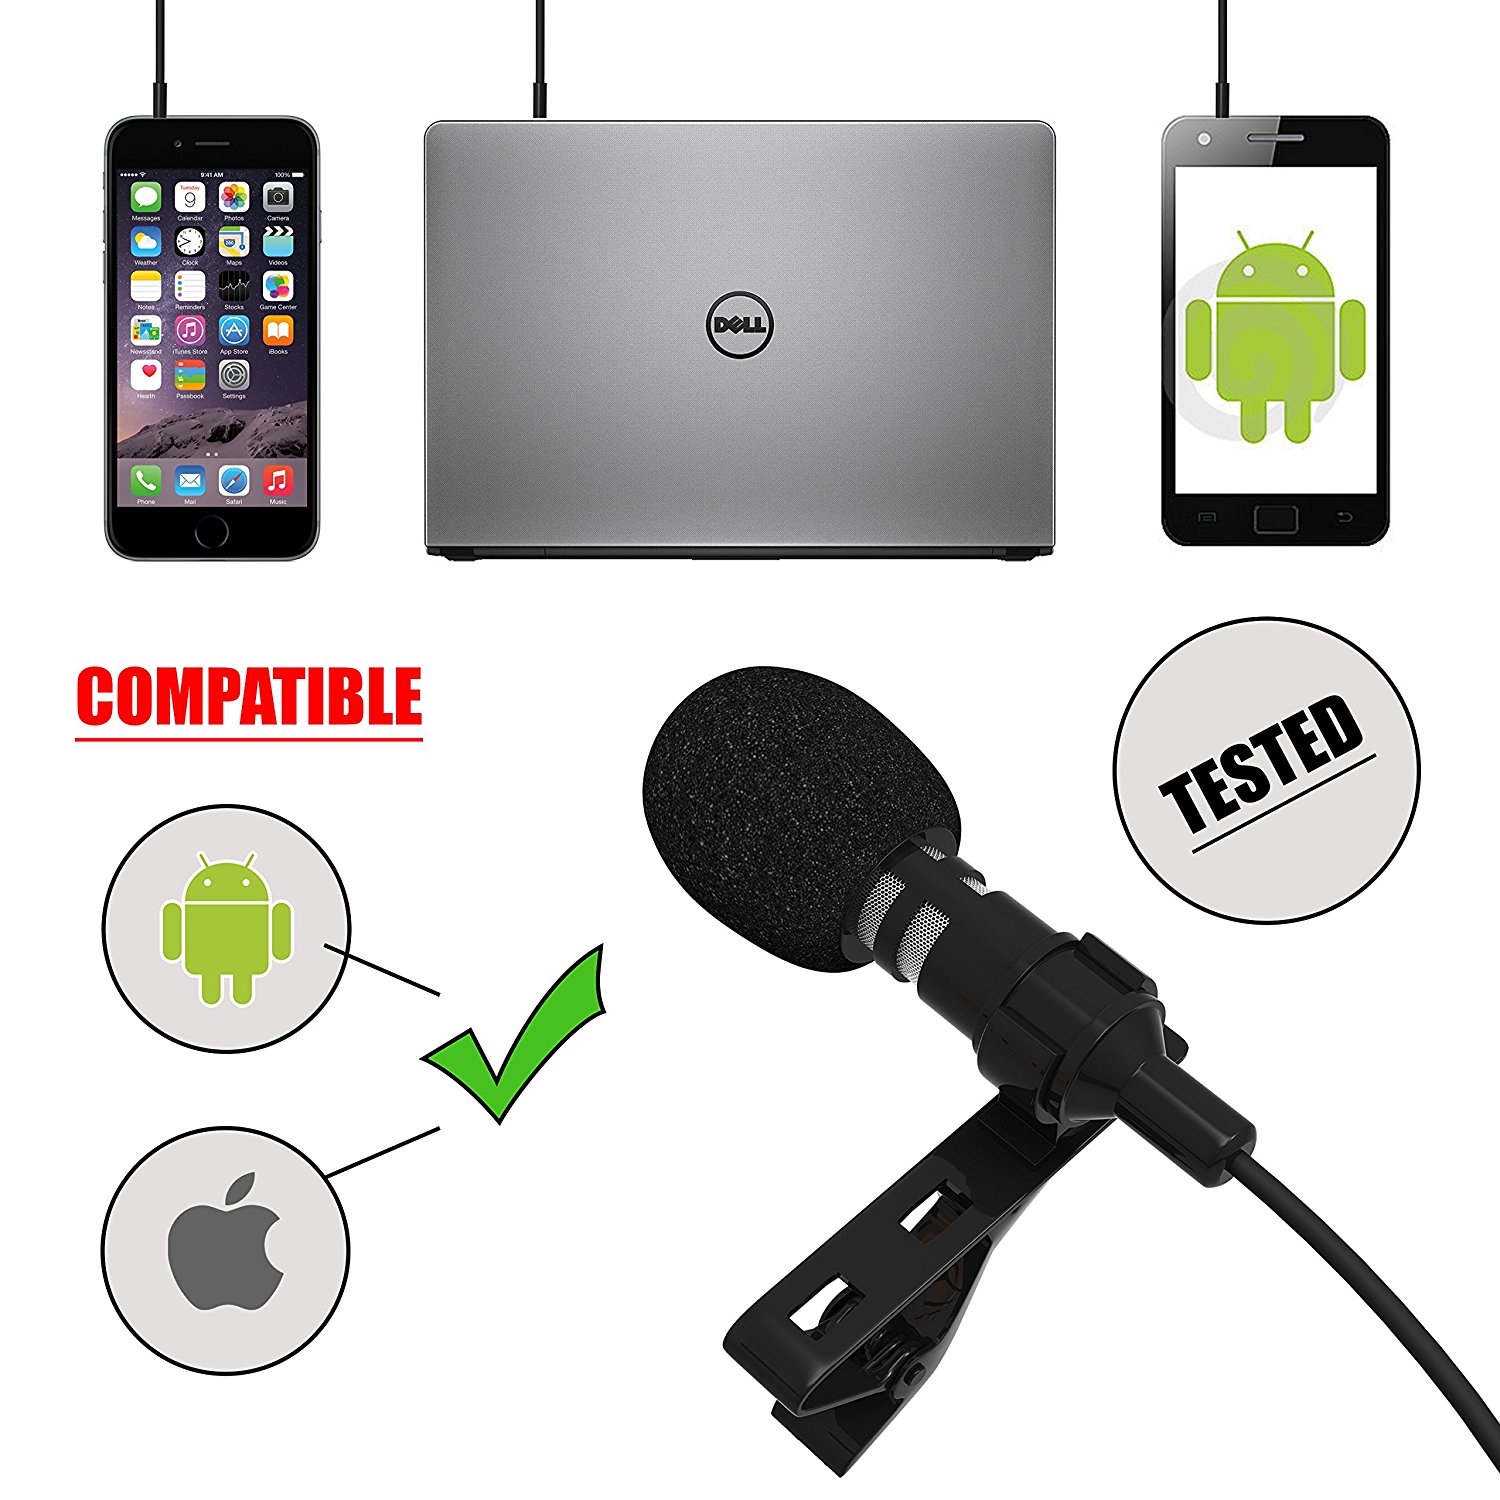 Living Venue Professional Voice Recording Lavalier Lapel Microphone for Vlogs, Smartphones, Tablets, Apple iPhone, DSLR Cameras! Best, Clip-On Lapel Microphone With FREE EXTRAS